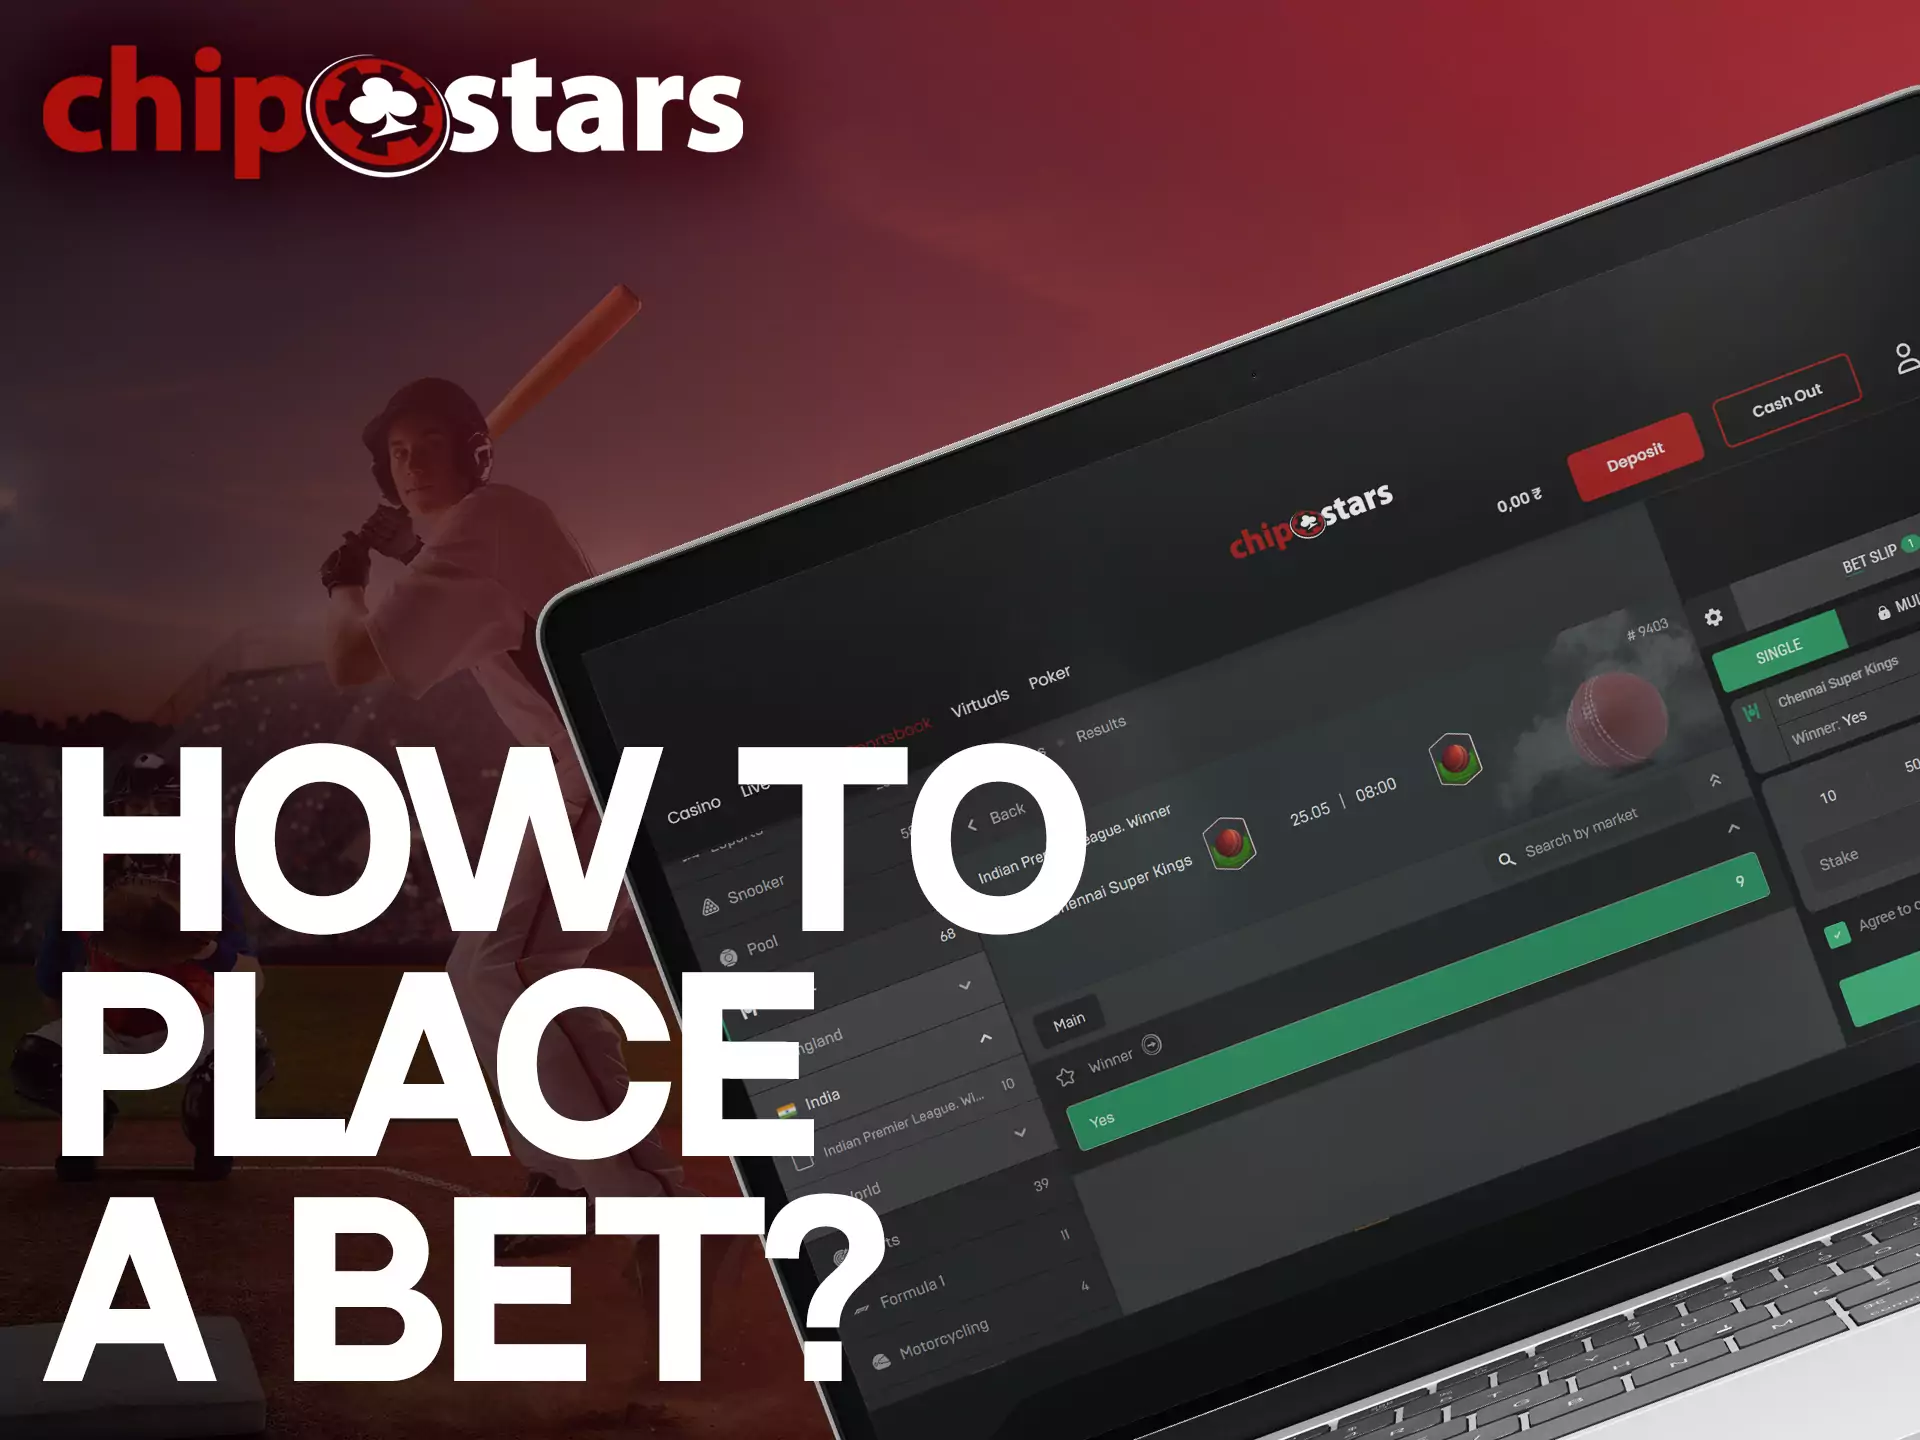 Go to the Chipstars sportsbook, choose a match, make a prediction and bet.